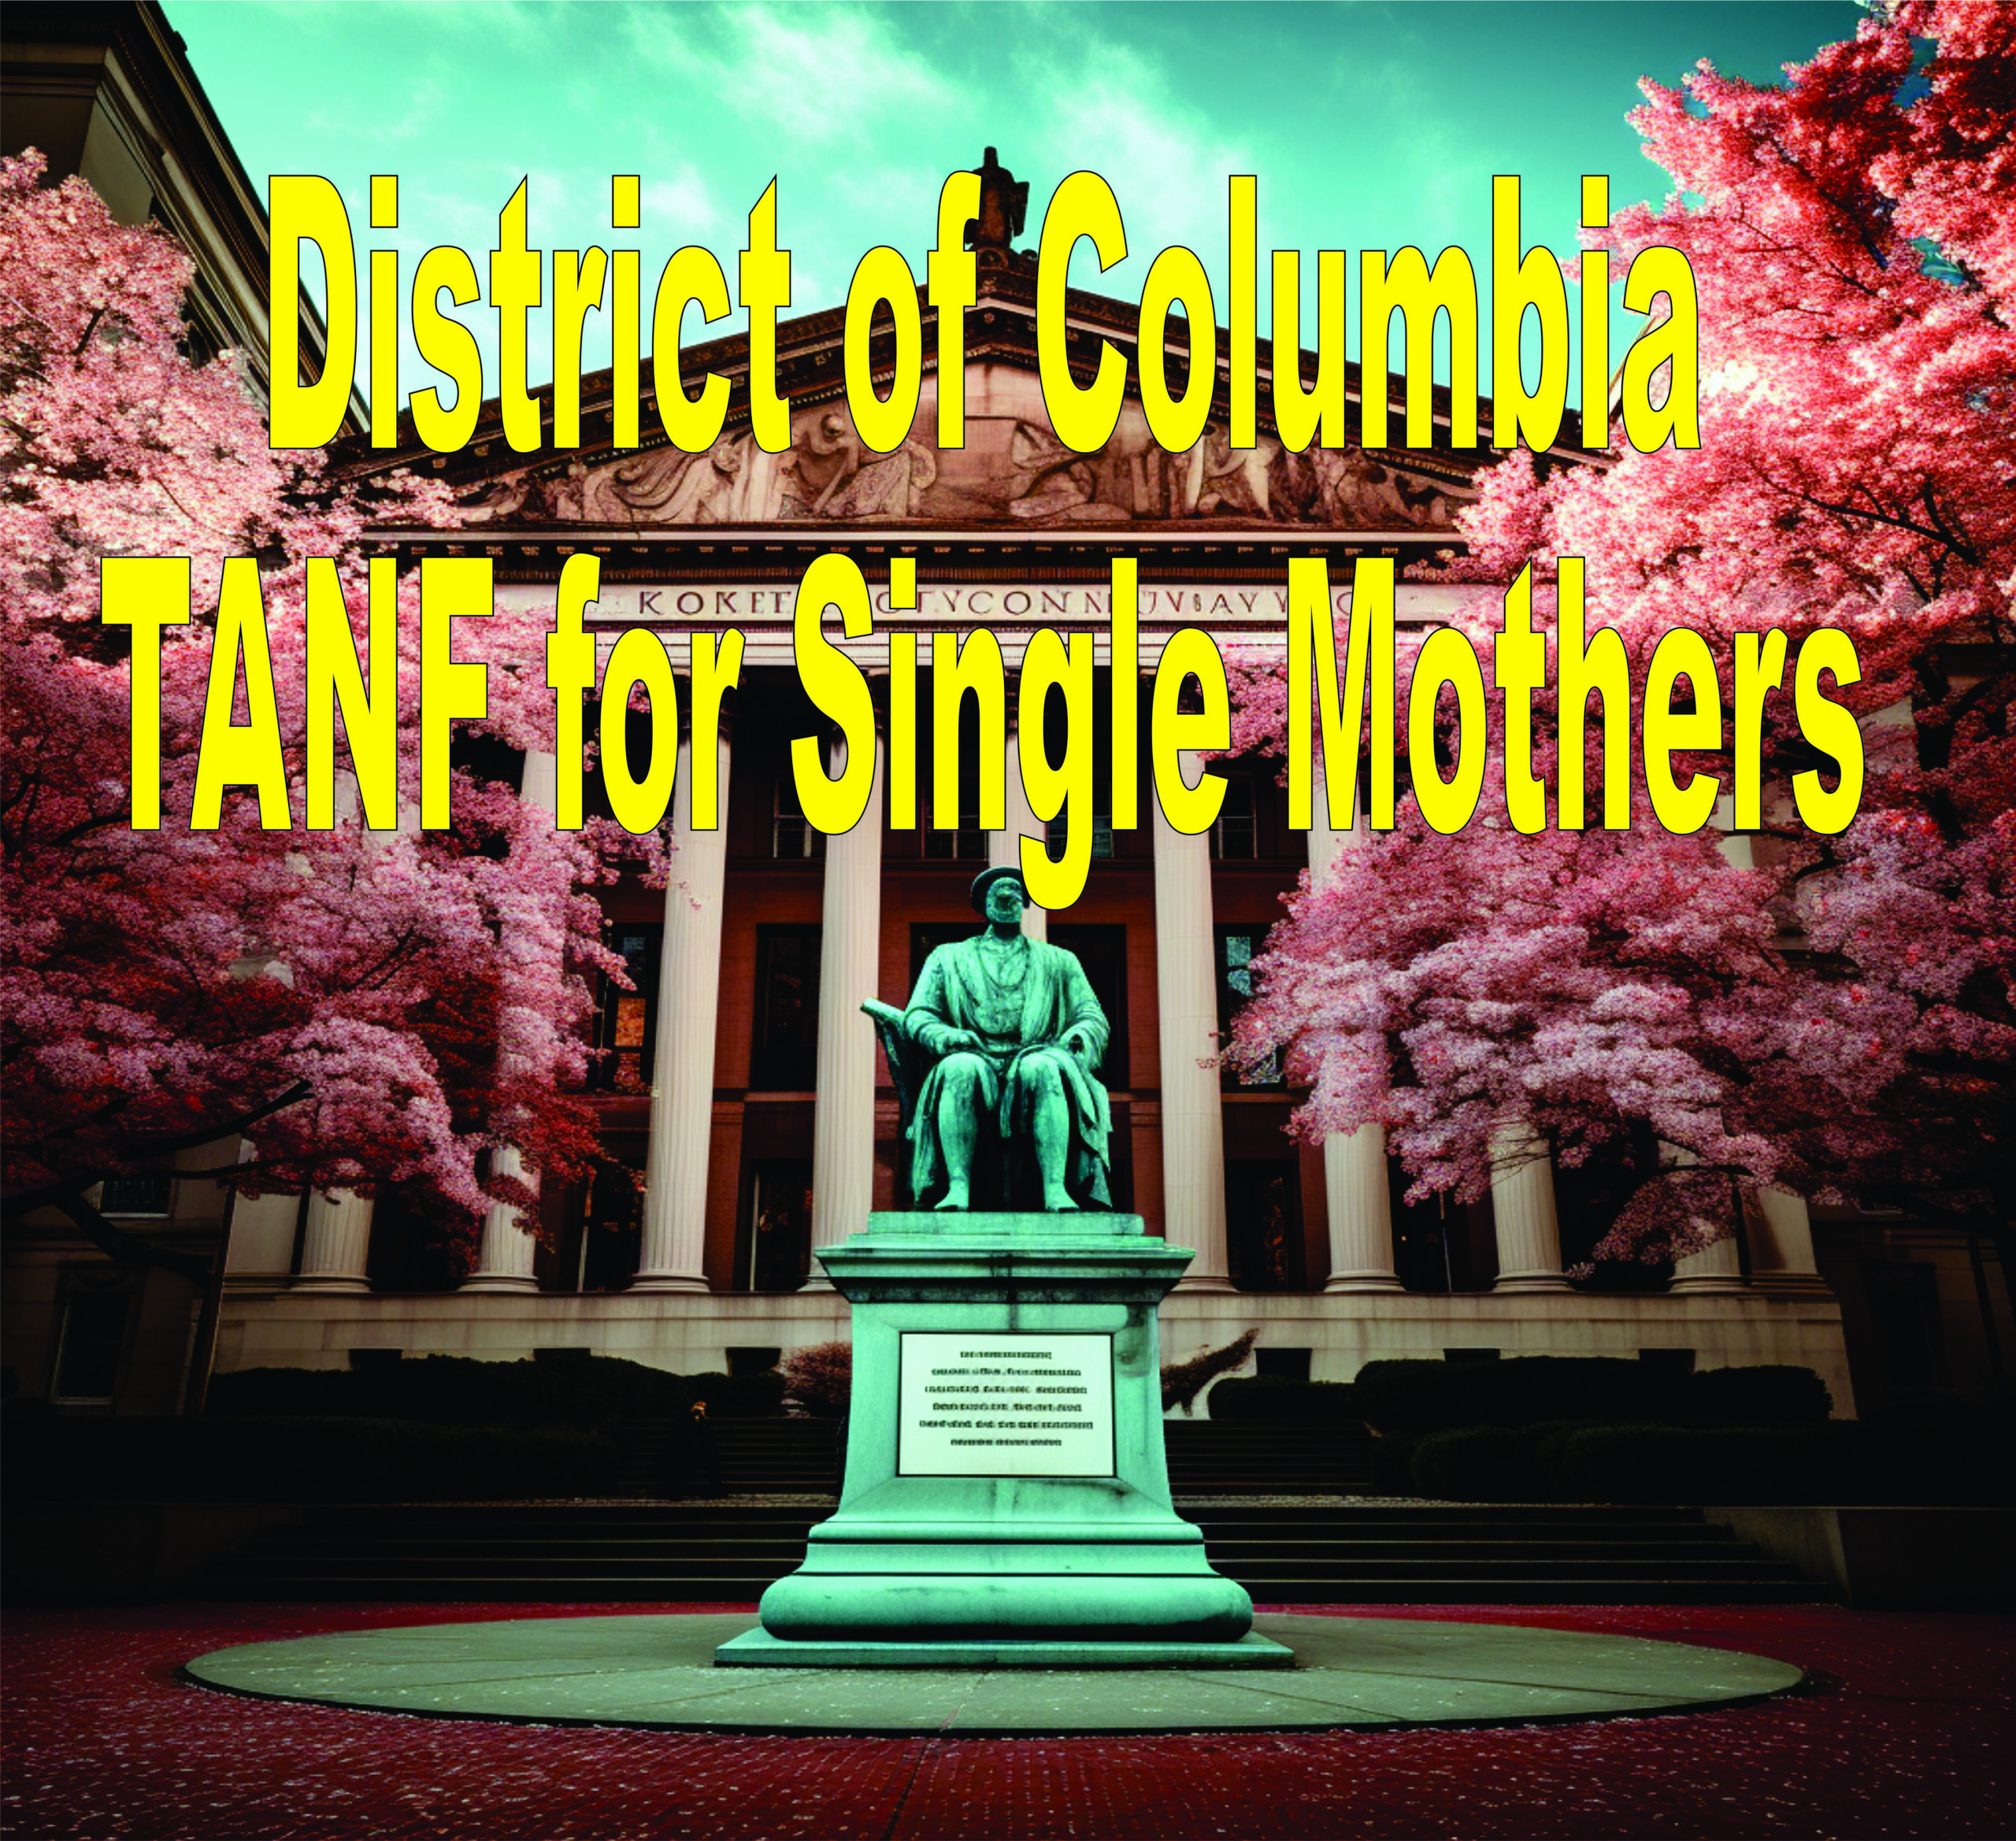 District Of Columbia Tanf For Single Mothers